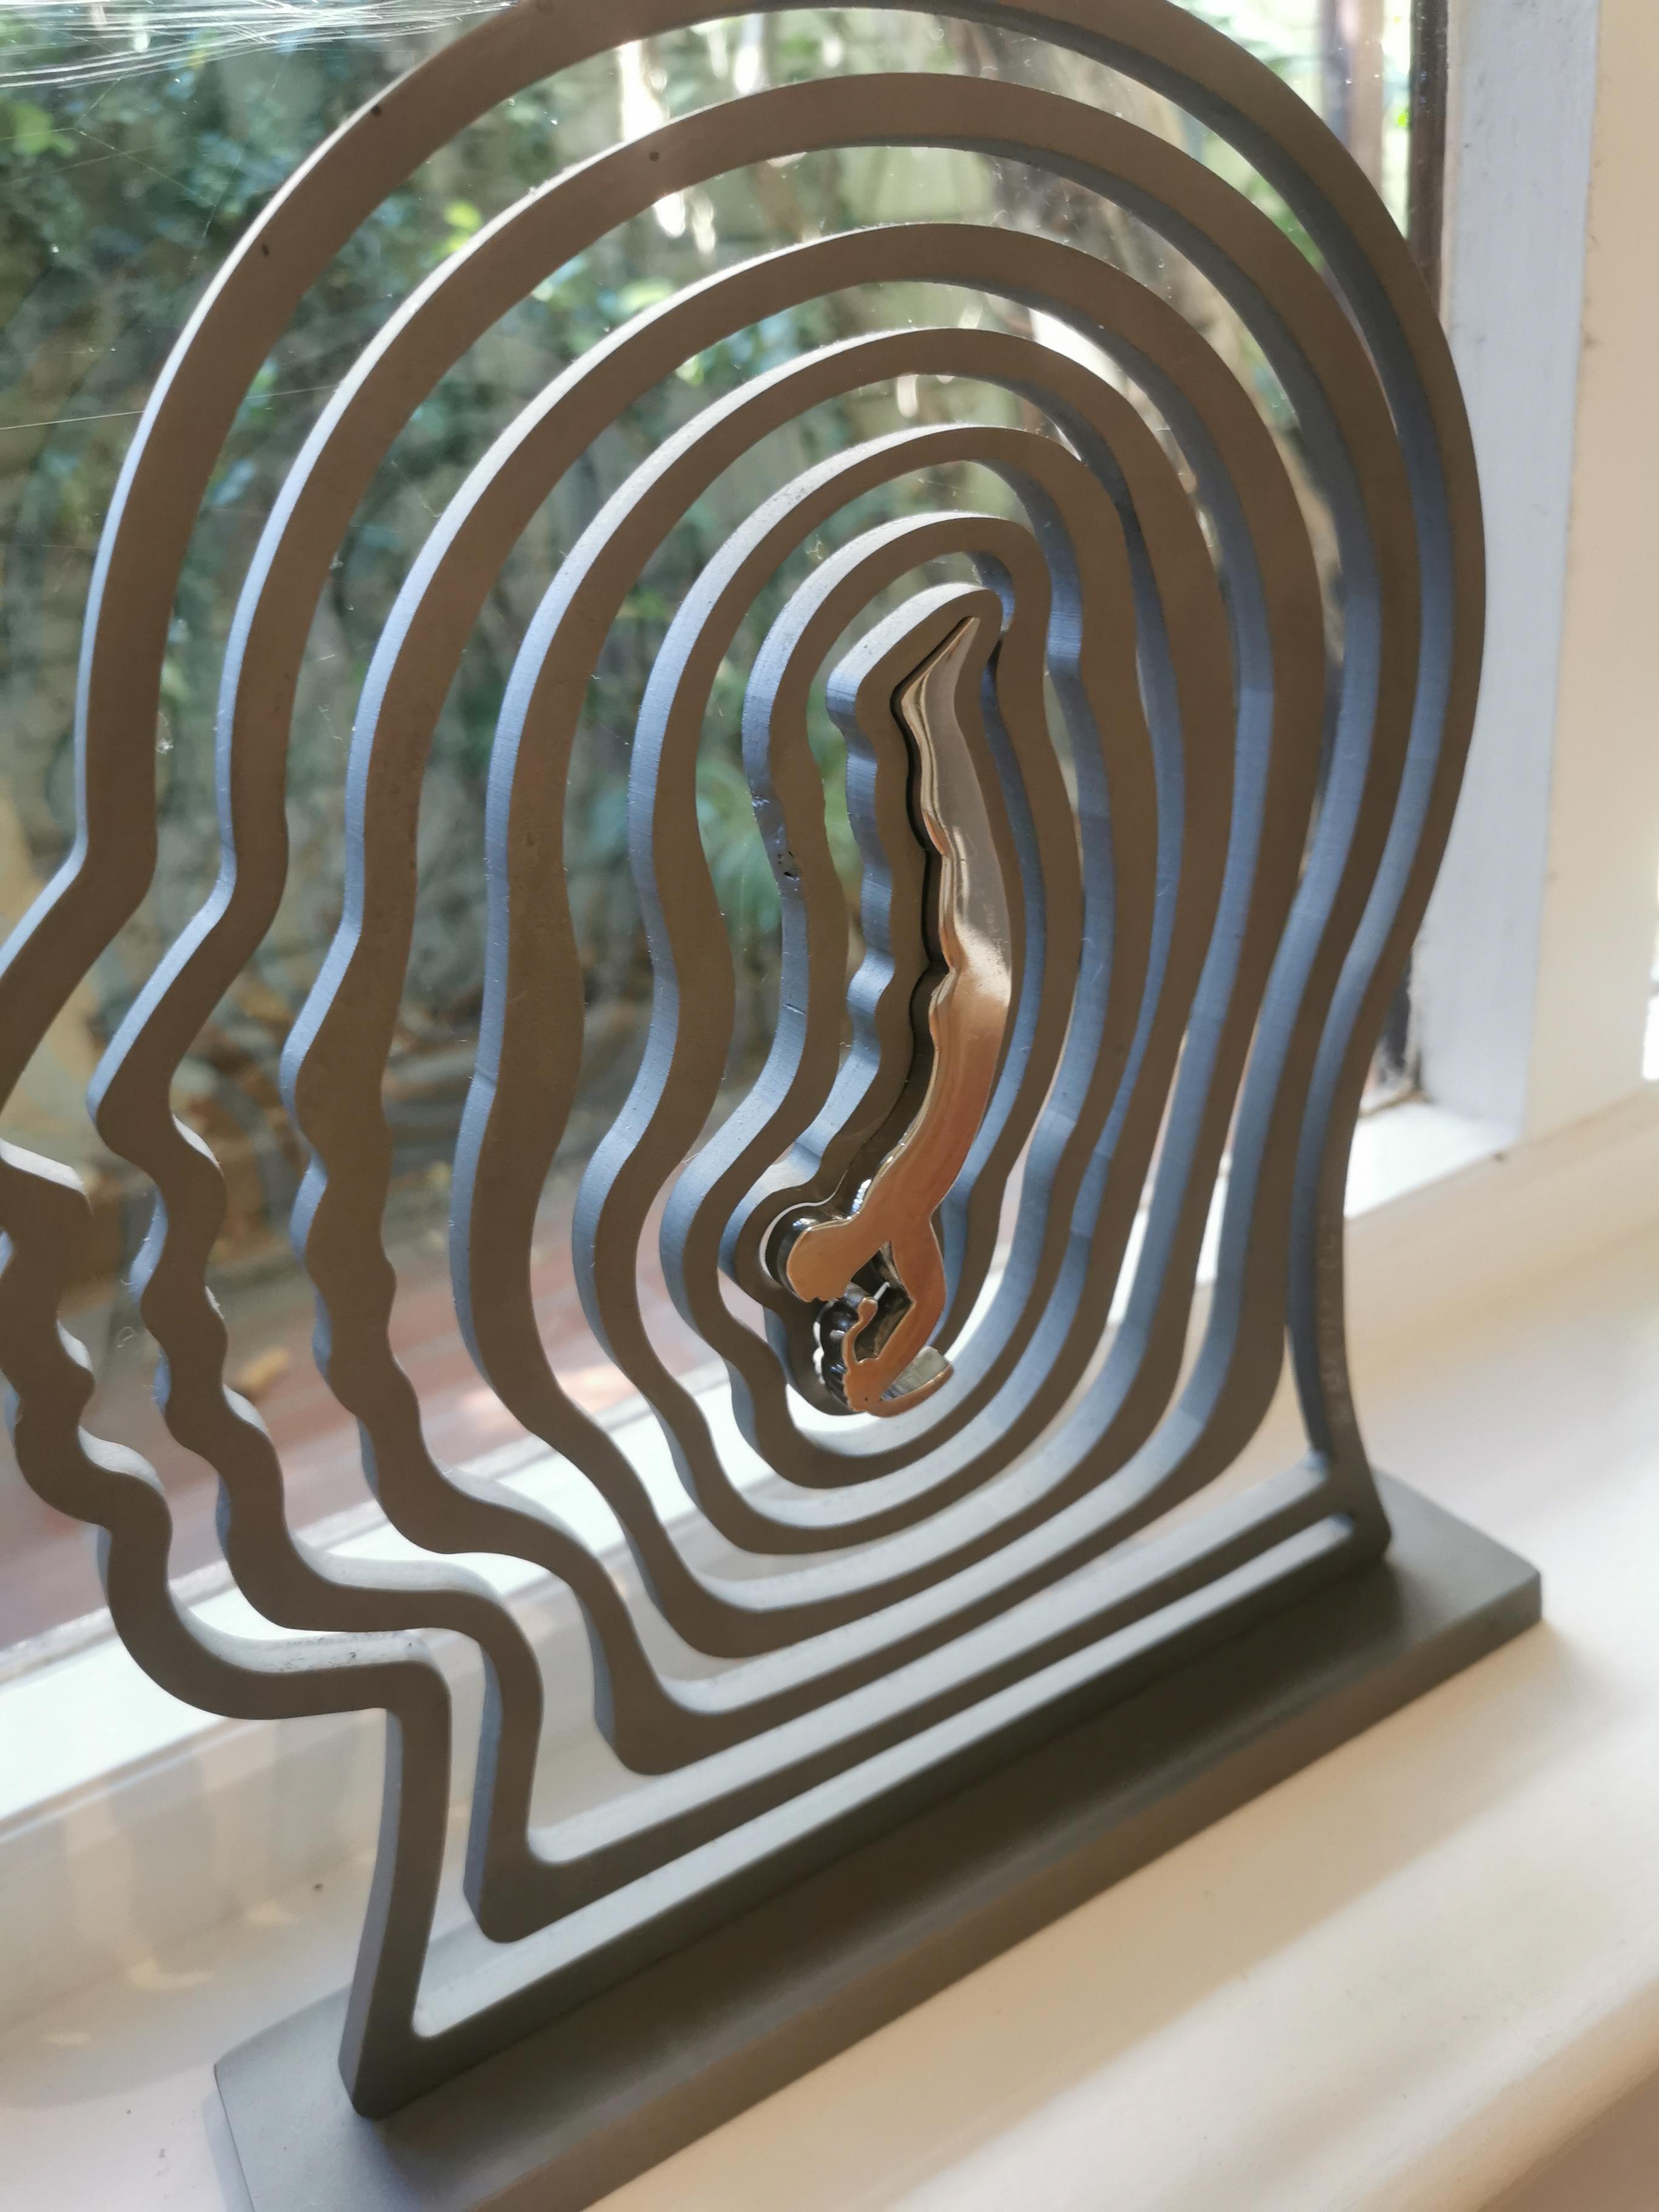 Limited Edition Stainless Steel Sculpture 